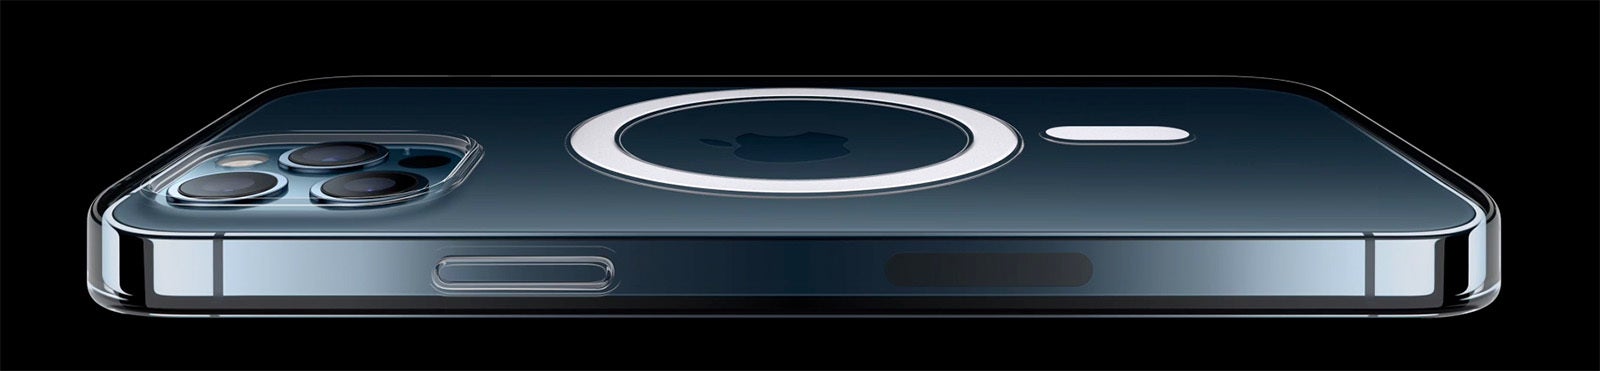 With MagSafe, new iPhones have magnets inside them so they snap onto wireless chargers for a precise fit - Apple officially unveils iPhone 12 Pro and Pro Max